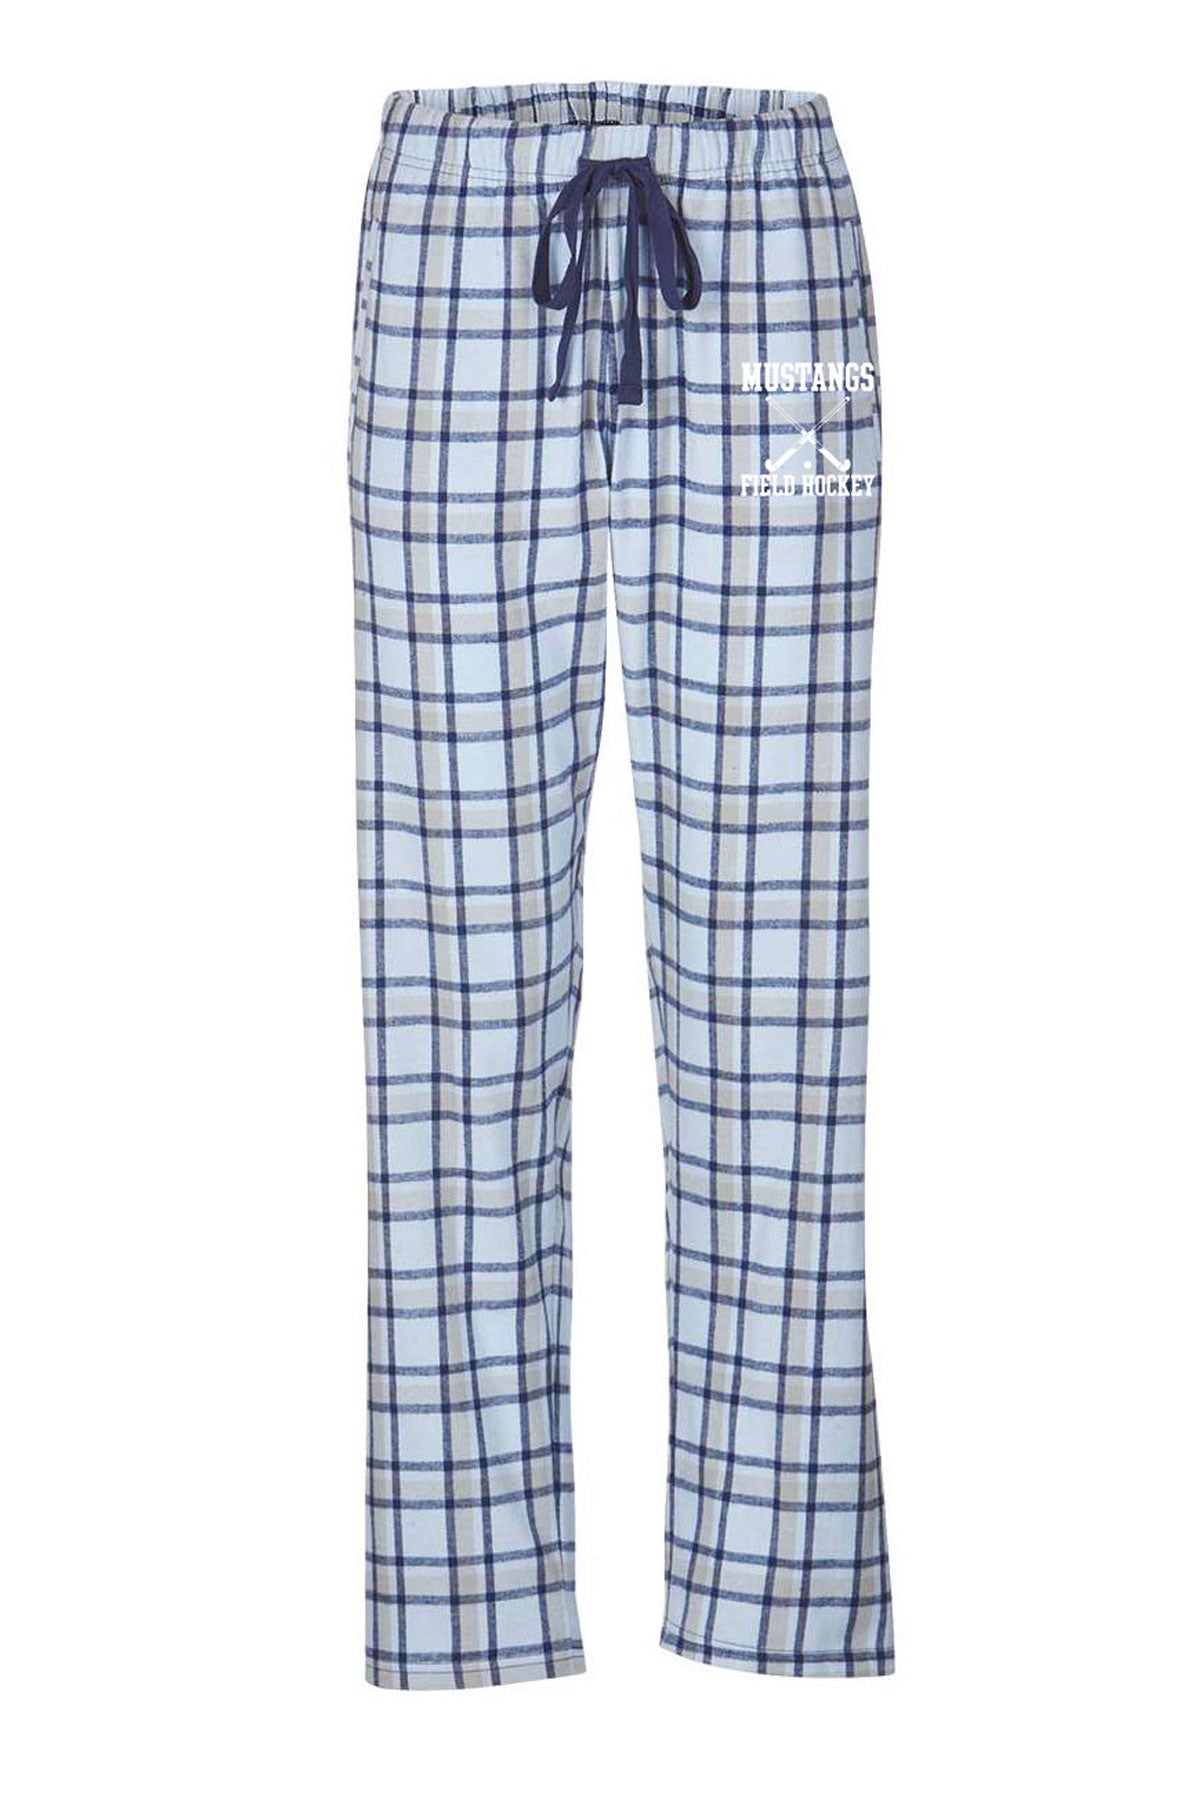 Back In Time Checkered Pants in Blue